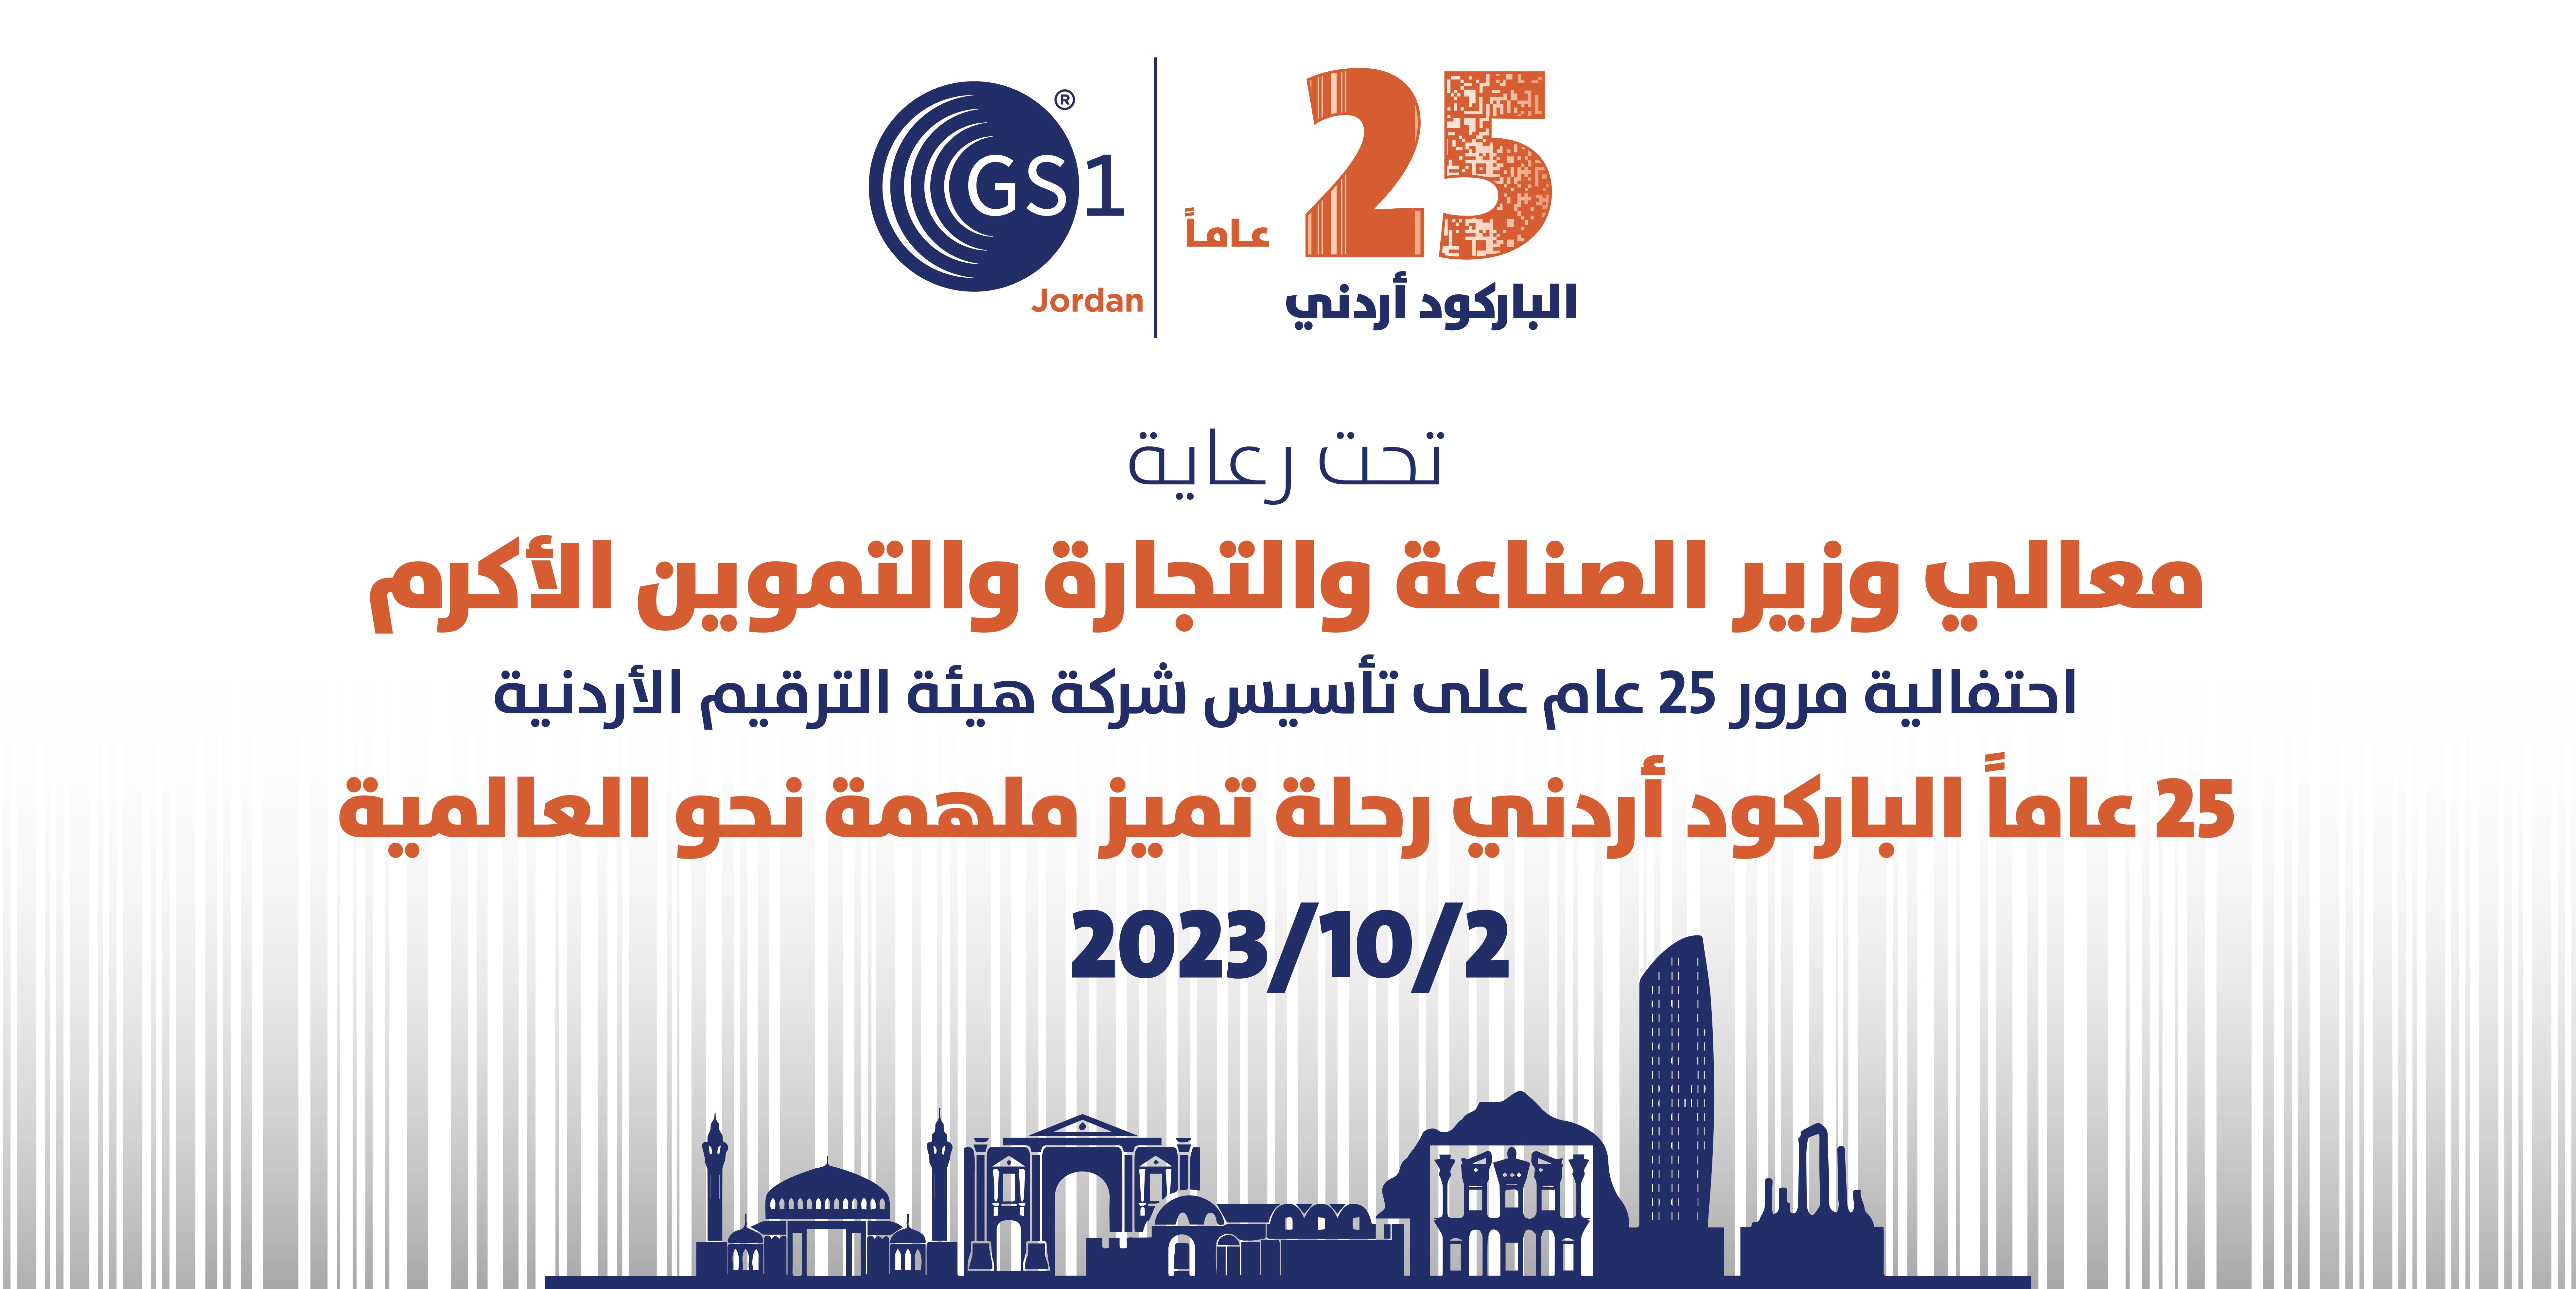 Jordan Numbering Association celebrates the 25th anniversary of its founding